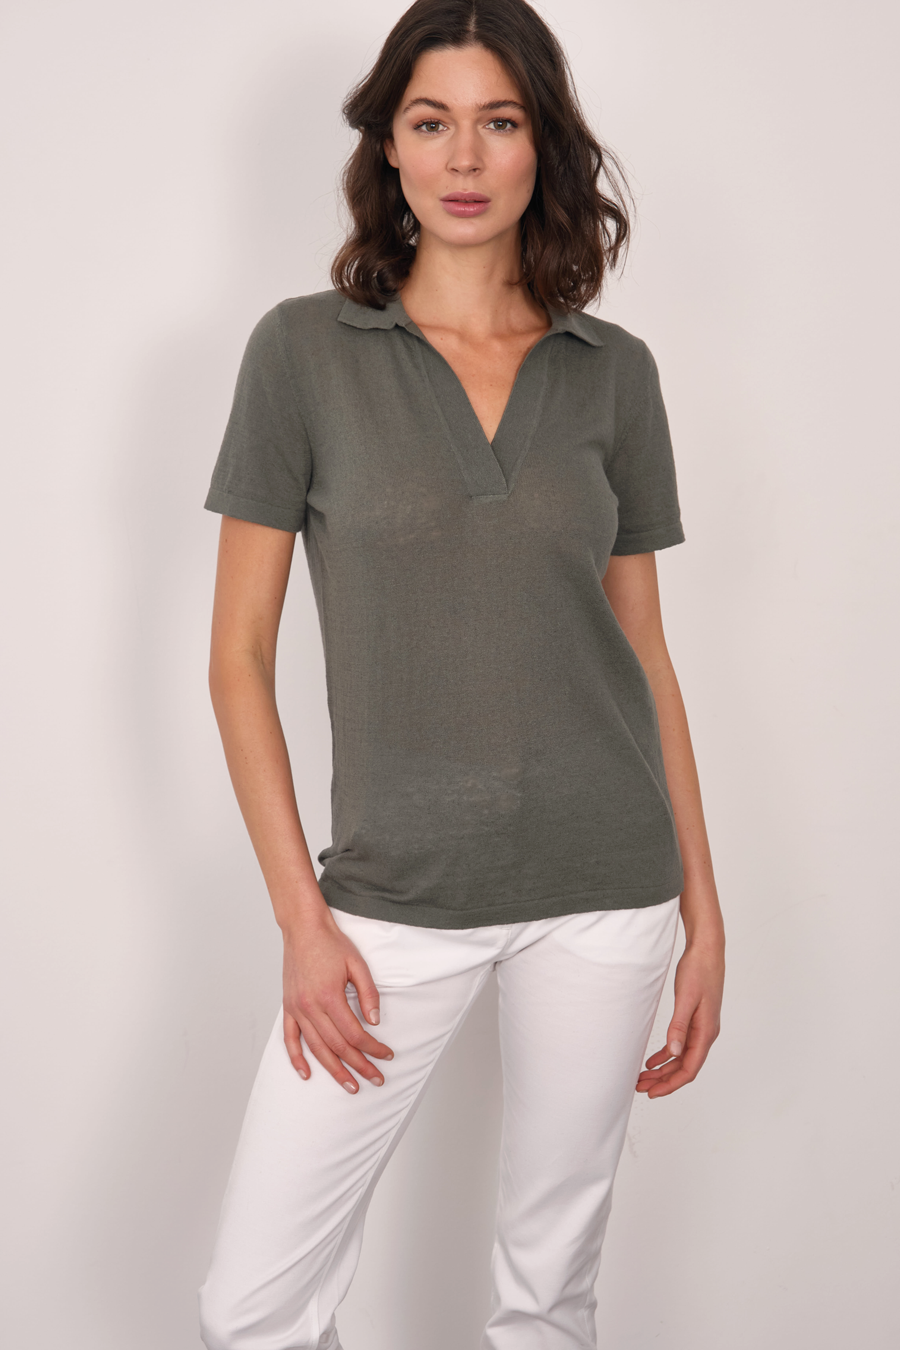 Polo Neck Knit Tee in Cotton/Linen Blend